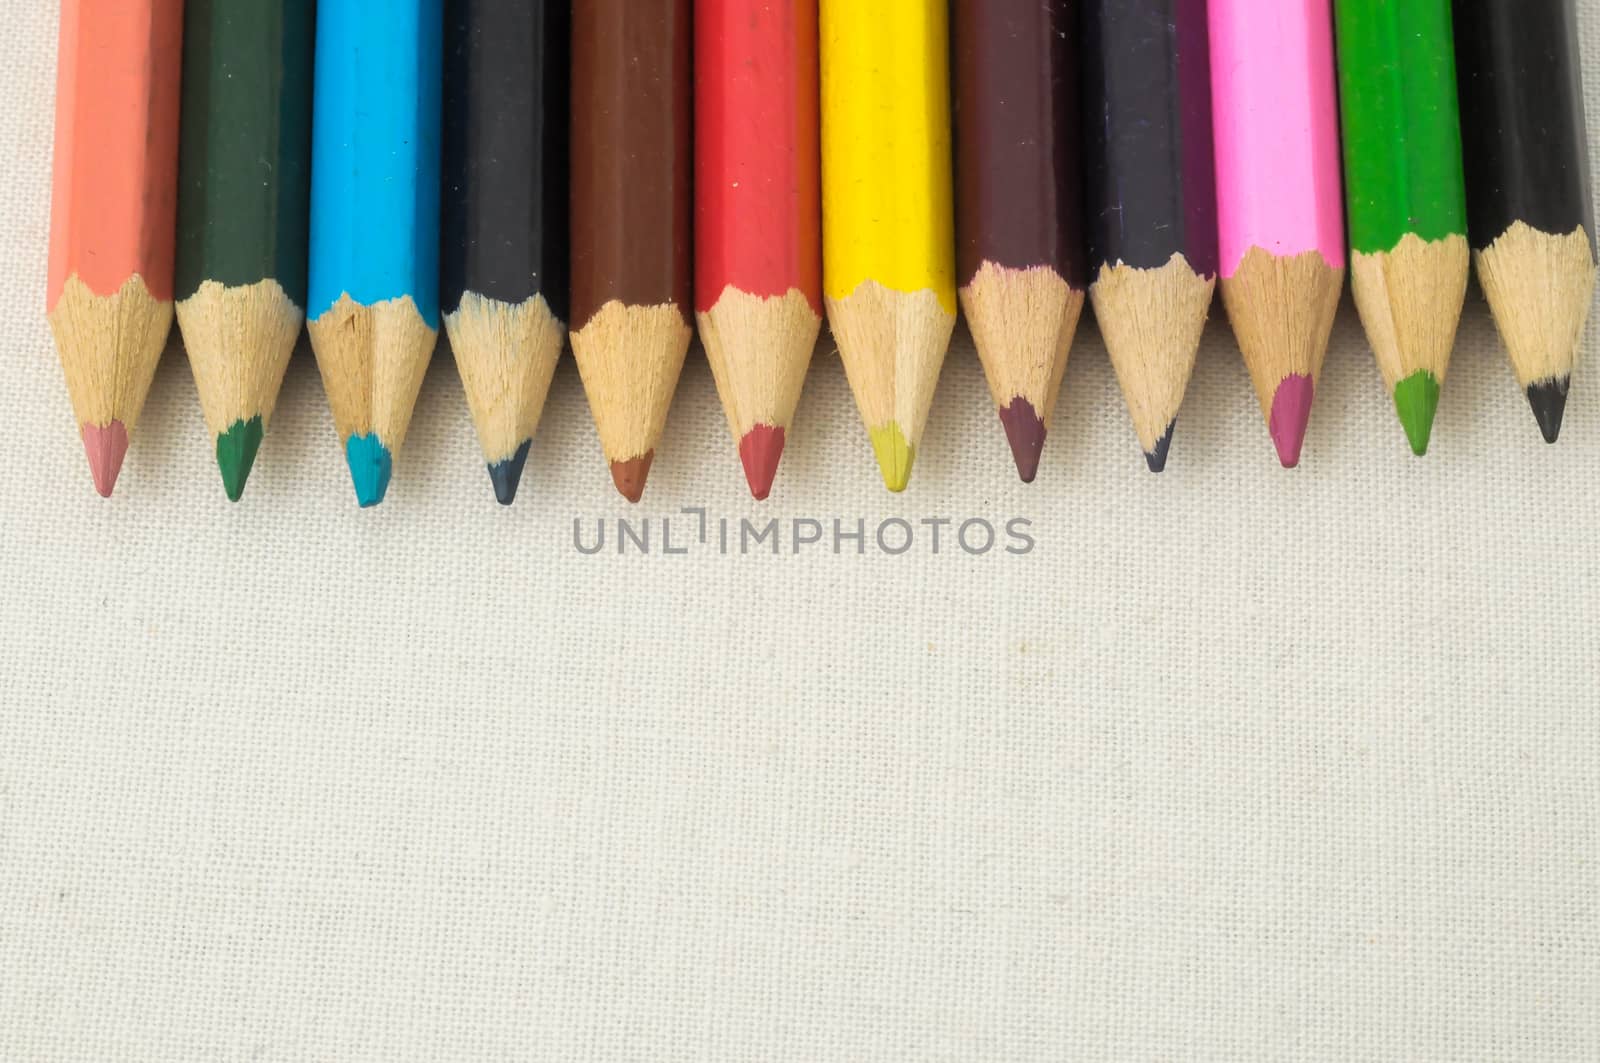 New Colored Pencils Textured by underworld